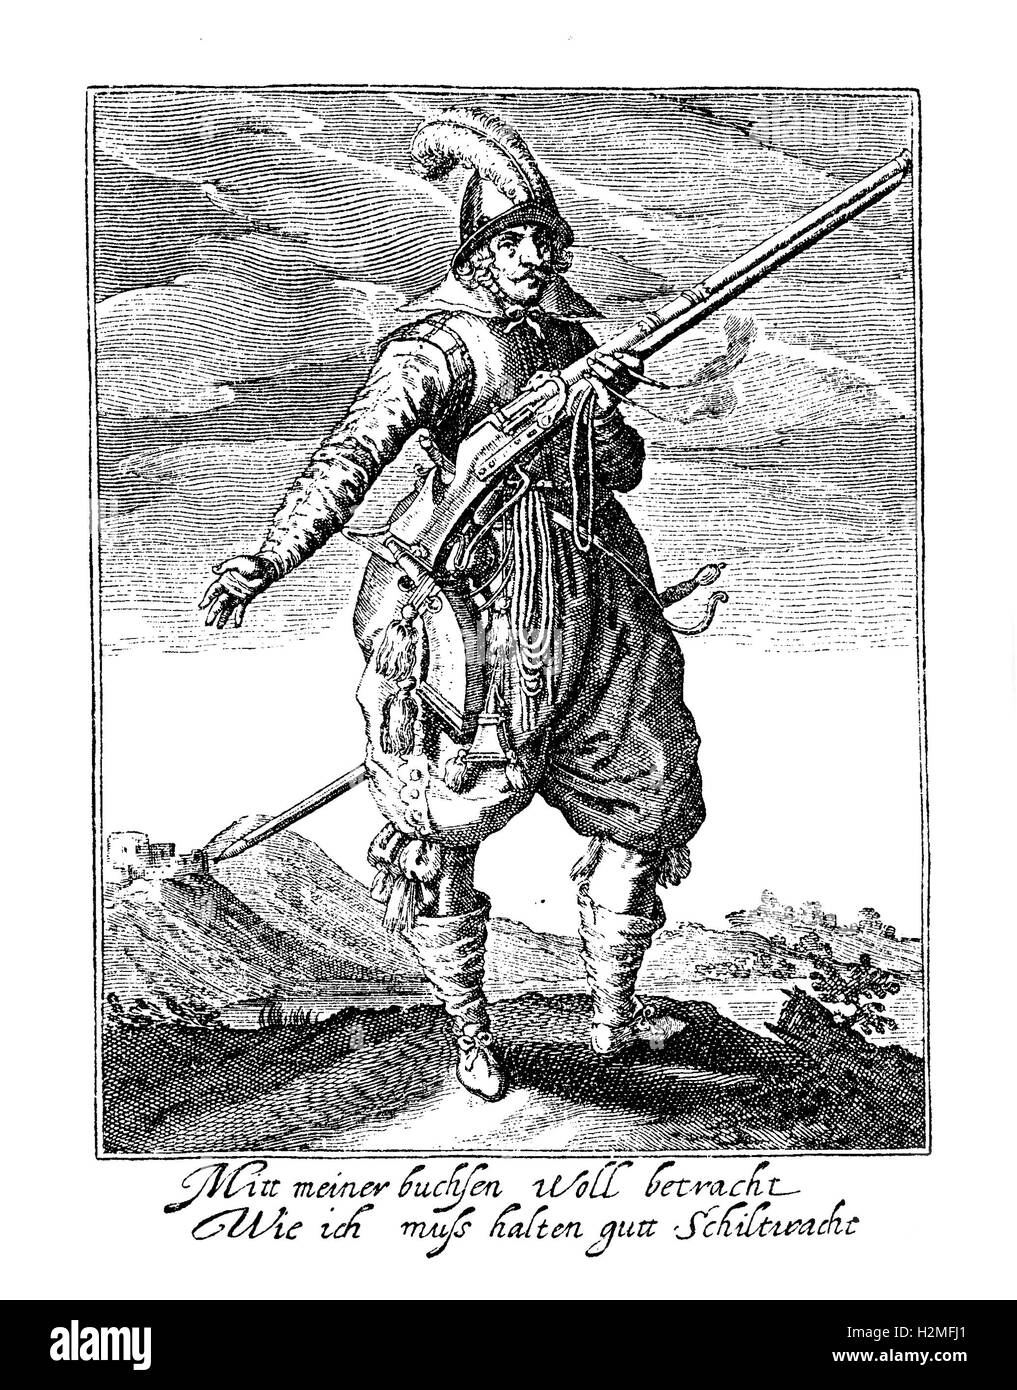 Thirty years war soldier, middle XVII century Stock Photo